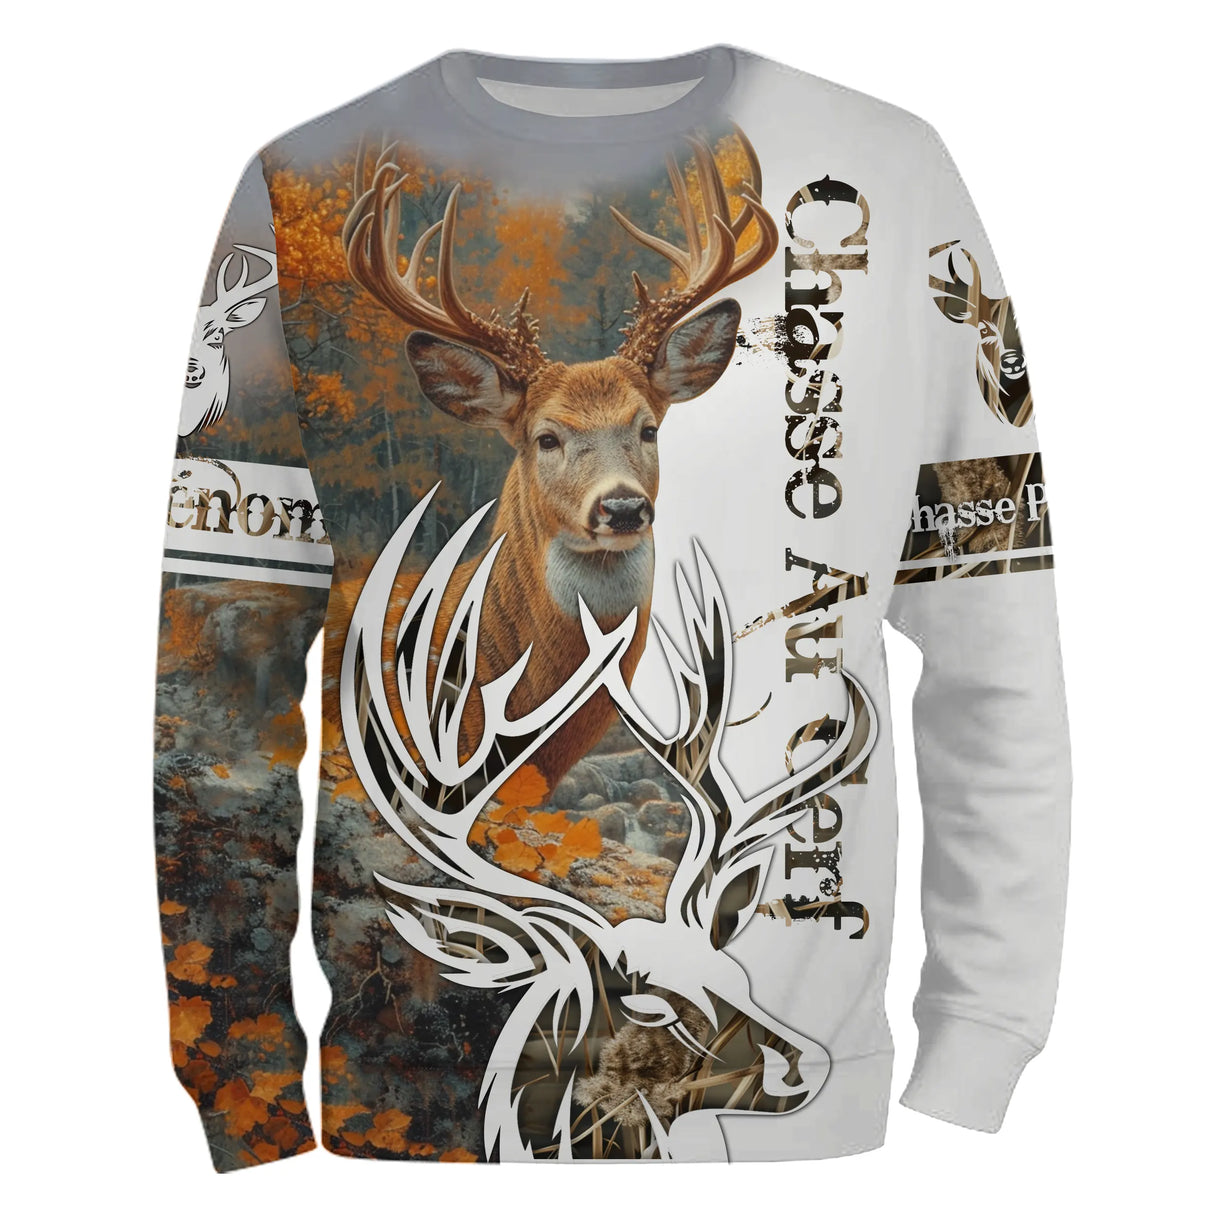 T-shirt, Sweat Chasse Au Cerf, Cadeau Personnaliser Chasseur, Camouflage Chasse Passion - CT09112219 Sweatshirt All Over Unisexe